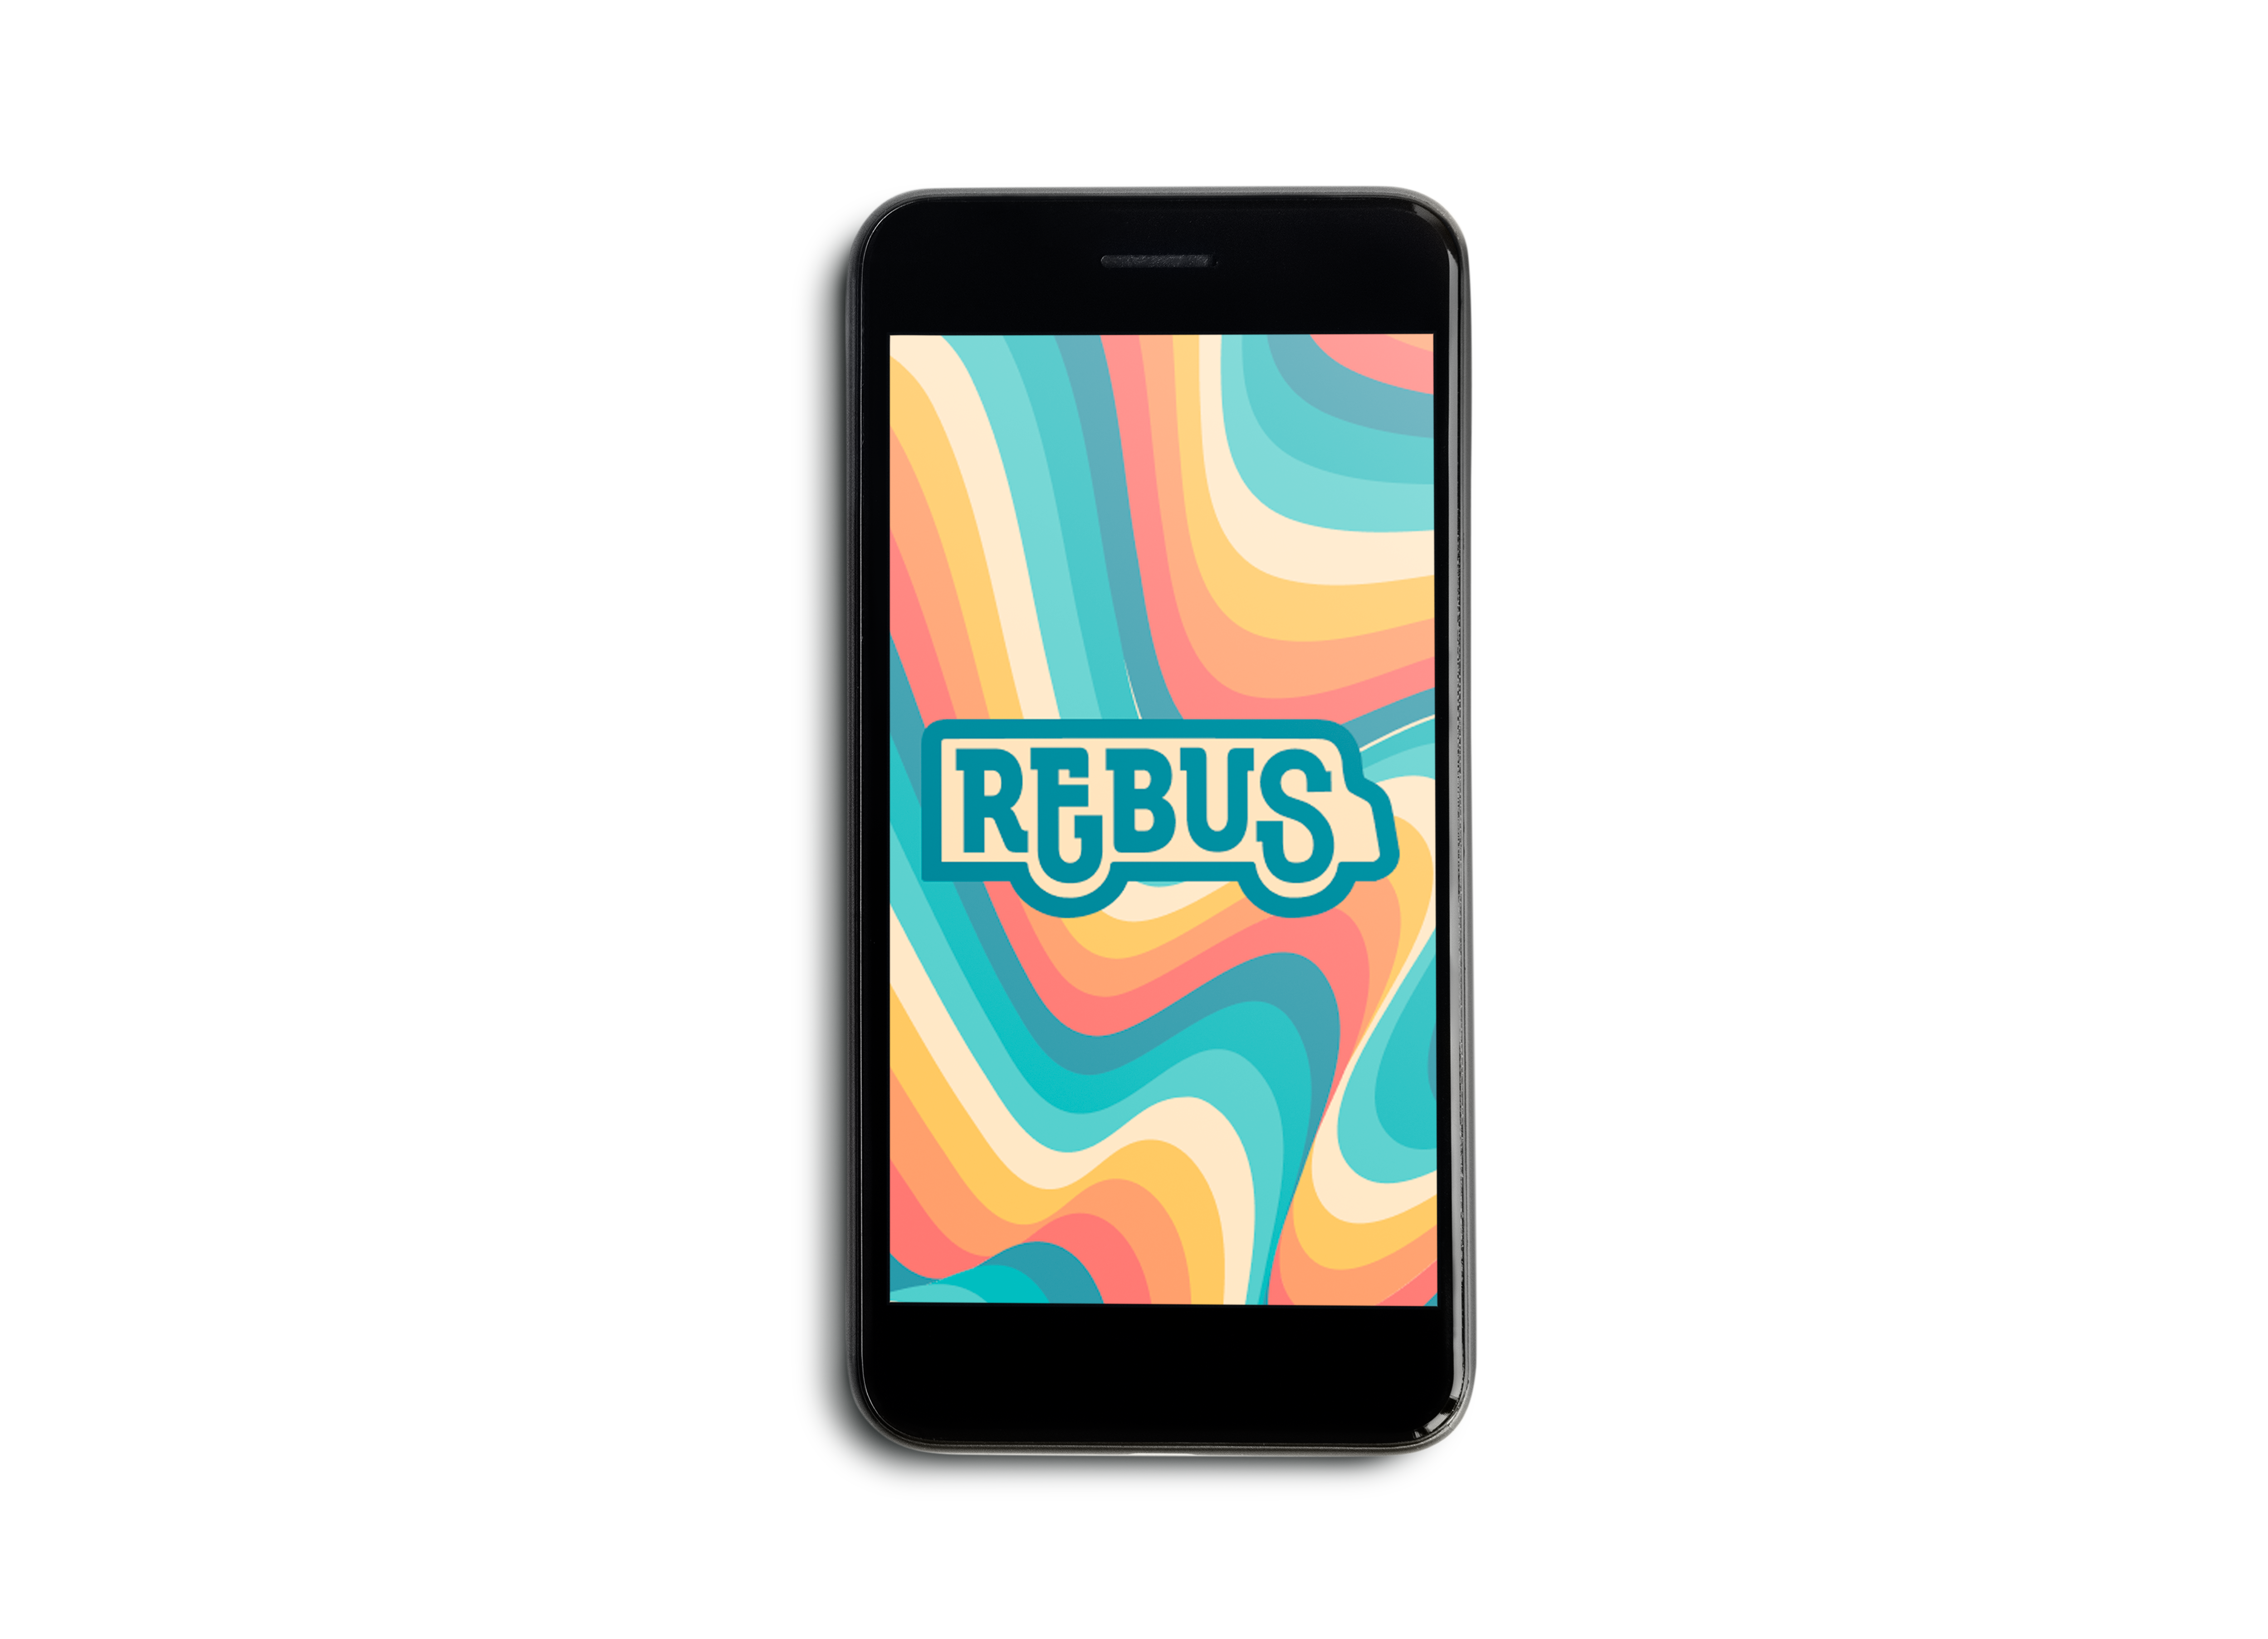 REBUS' mobile website loading page